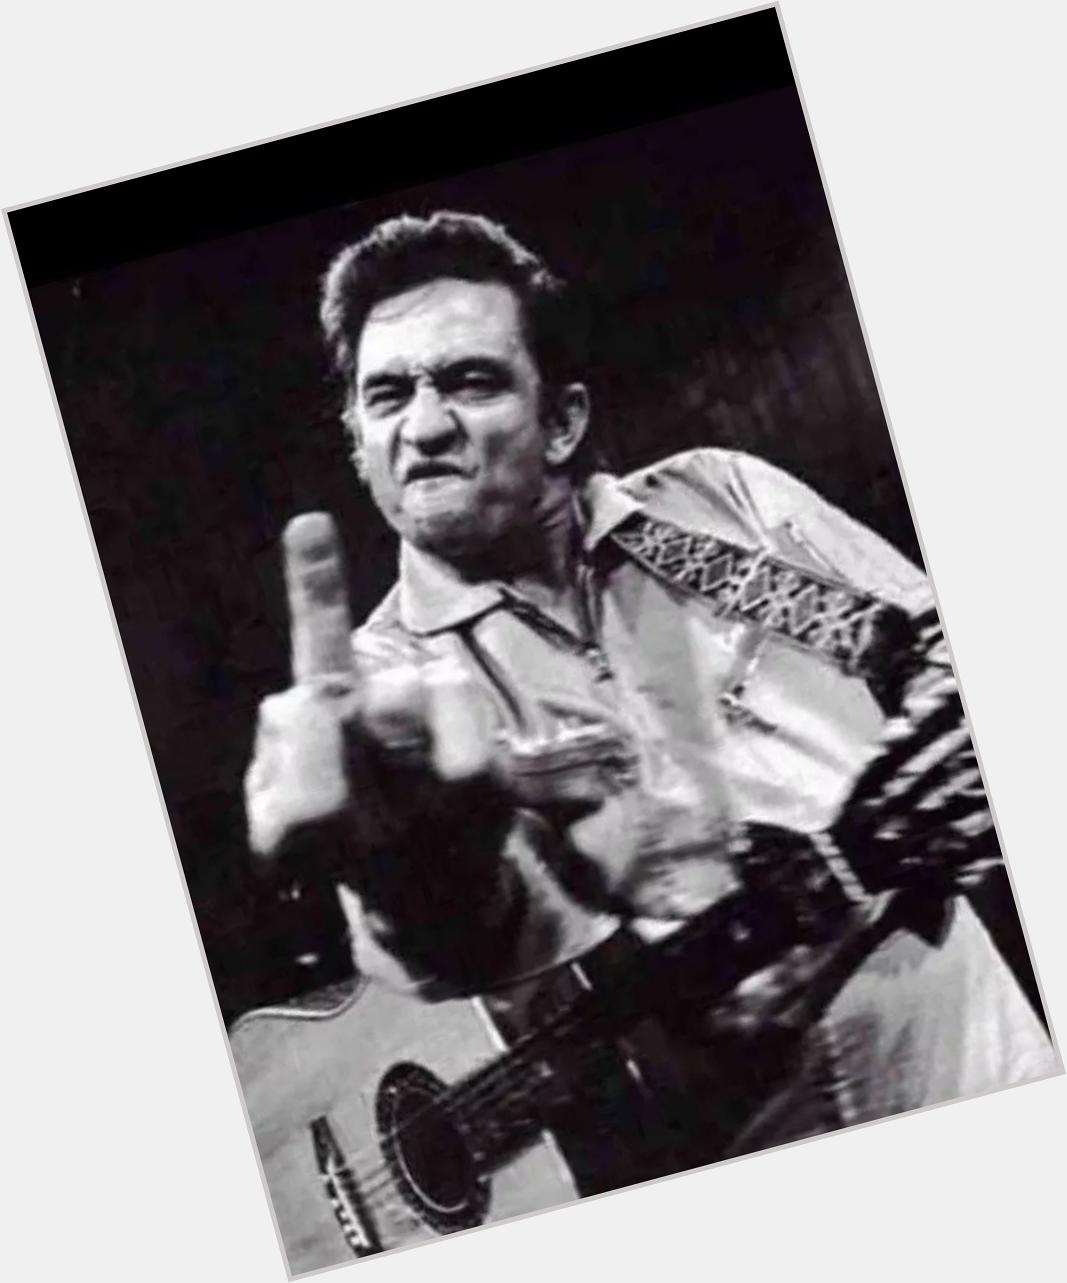 Happy Birthday to Johnny Cash. The man we need is the Man in Black. 